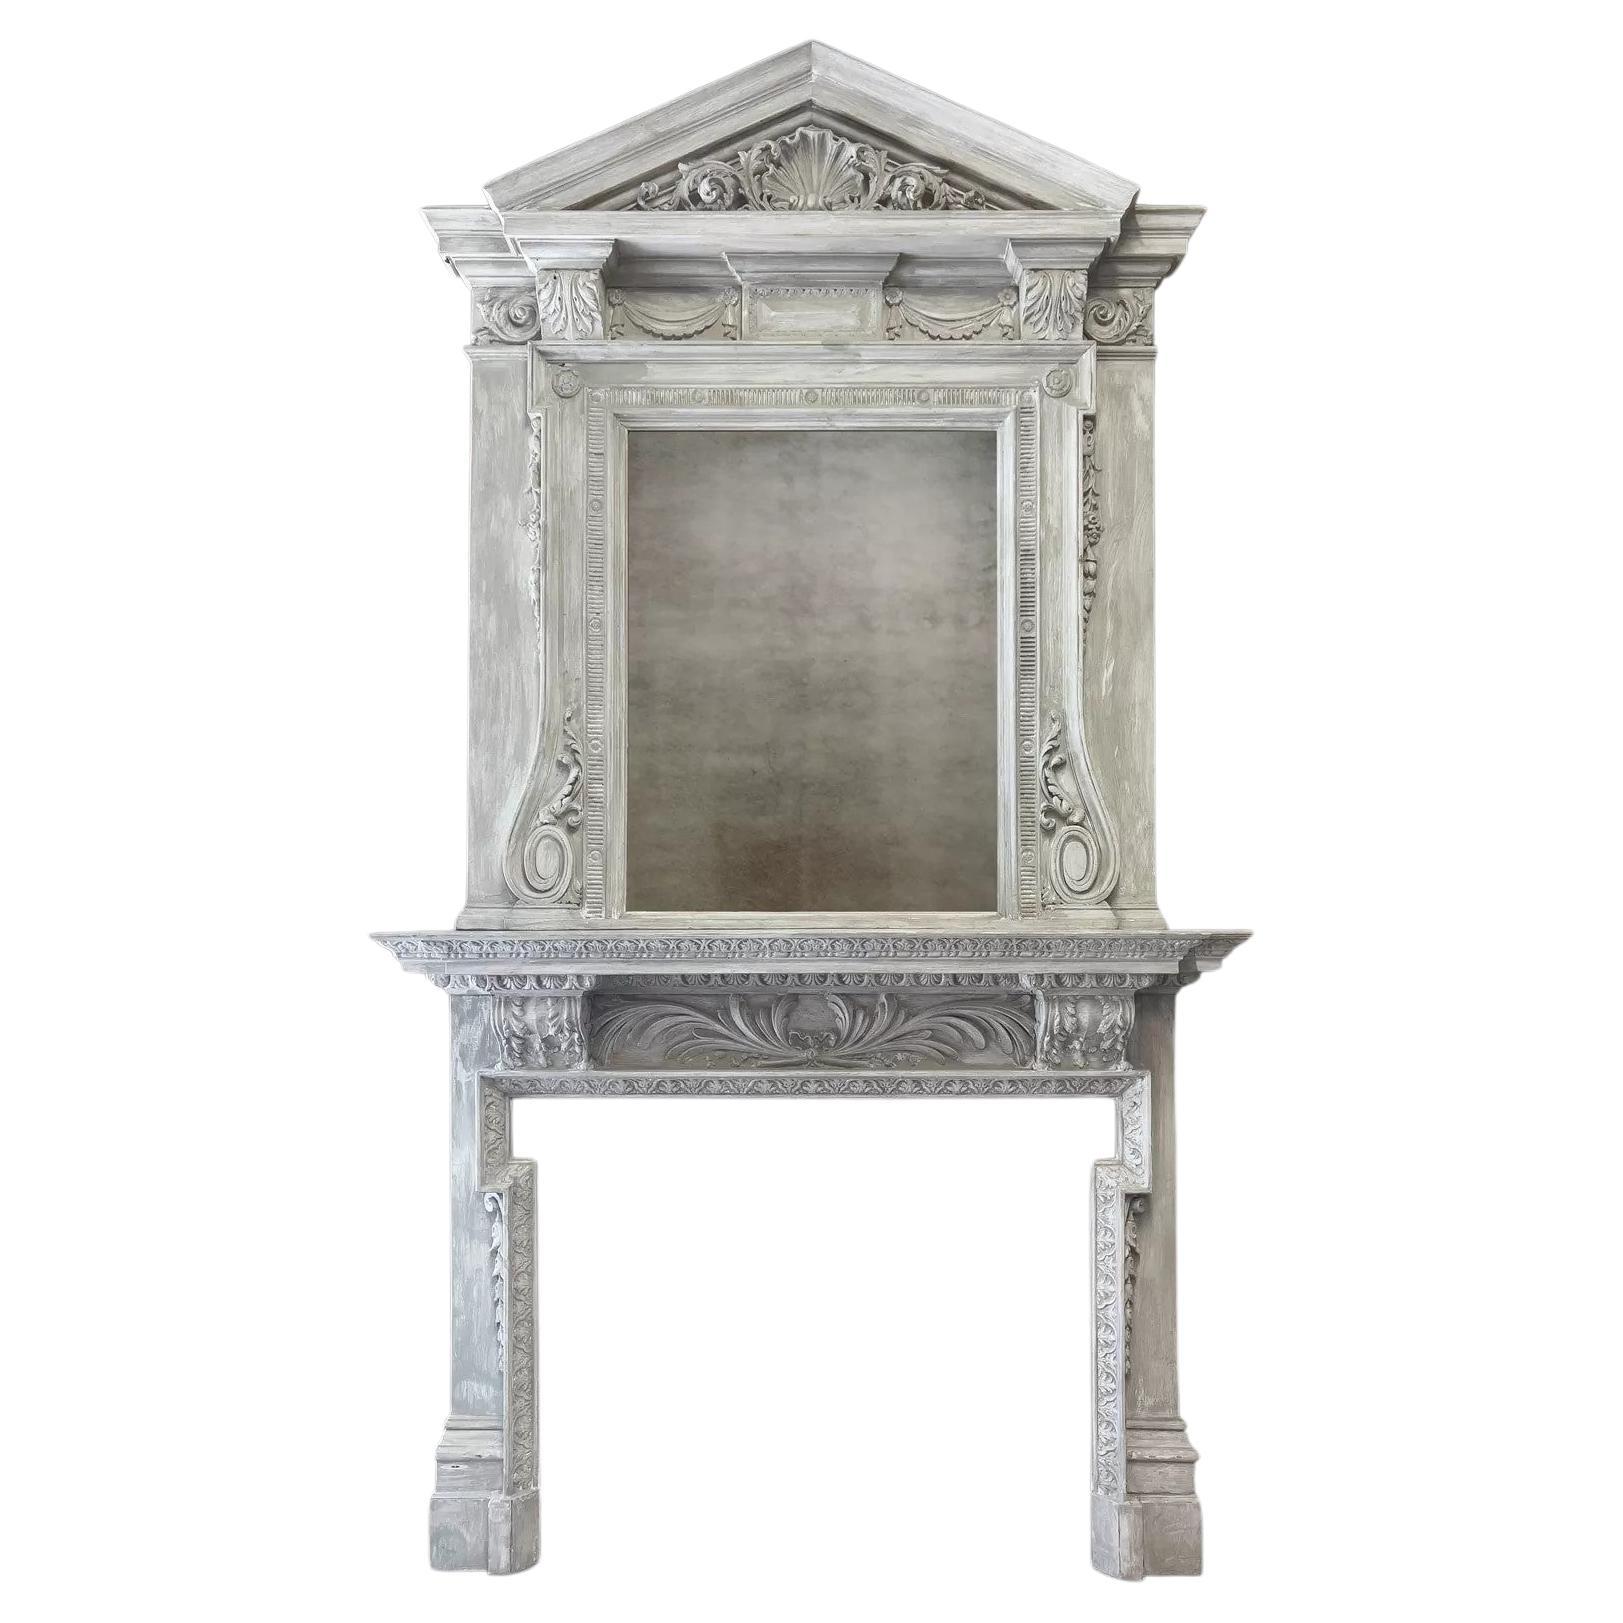 A large antique painted wooden fireplace with overmantel mirror